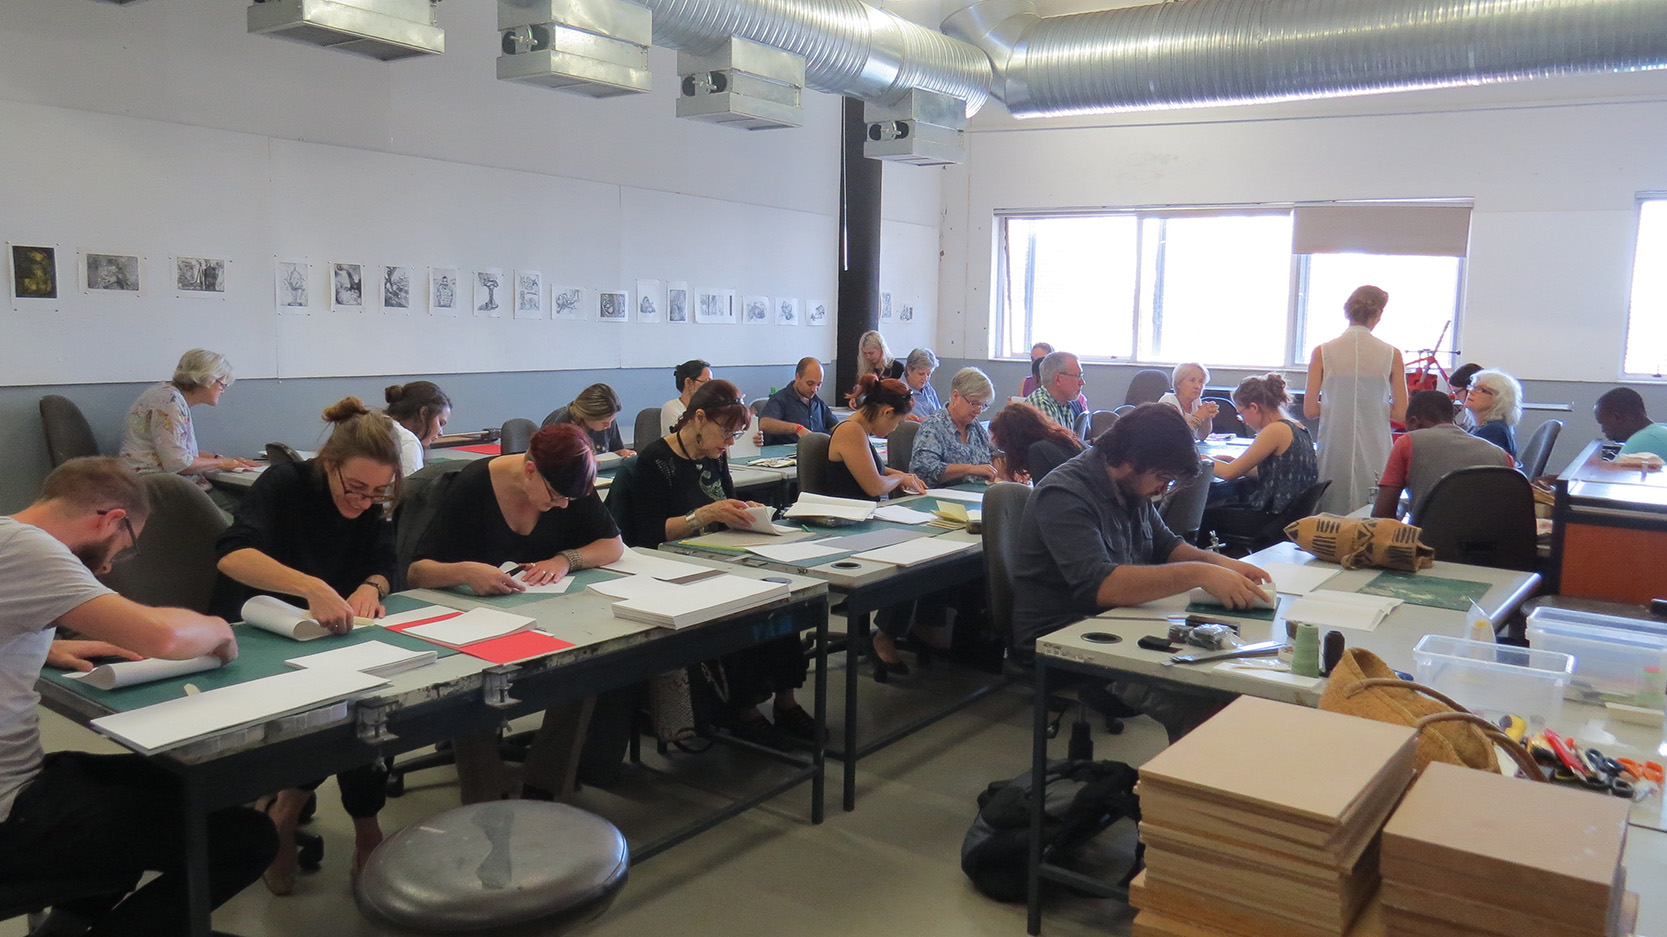 Click the image for a view of: Helene van Aswegens Bookbinding Workshop, Department of  Visual Art, Thurs 23 March